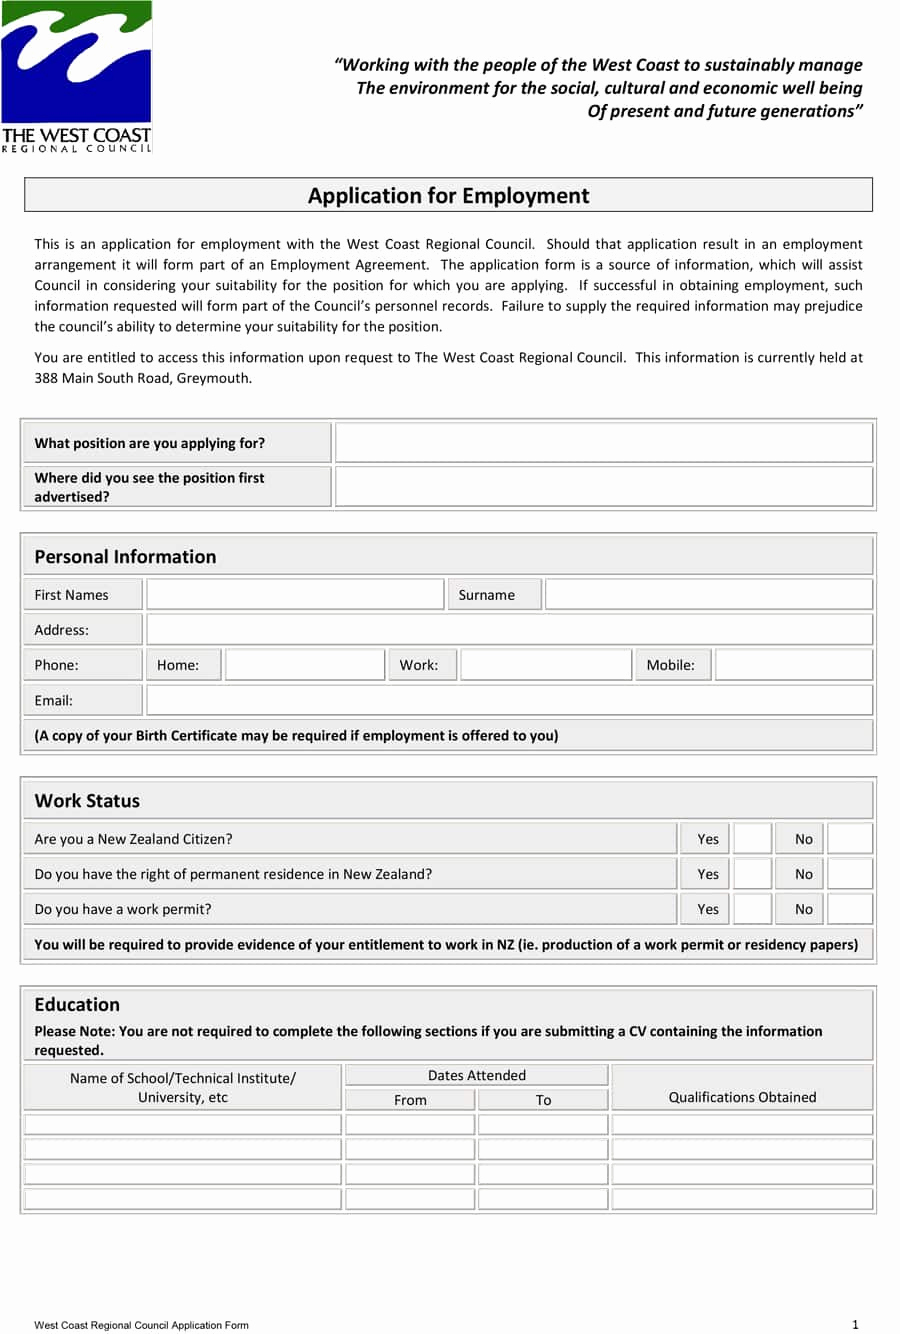 Job Application form Sample Awesome 50 Free Employment Job Application form Templates